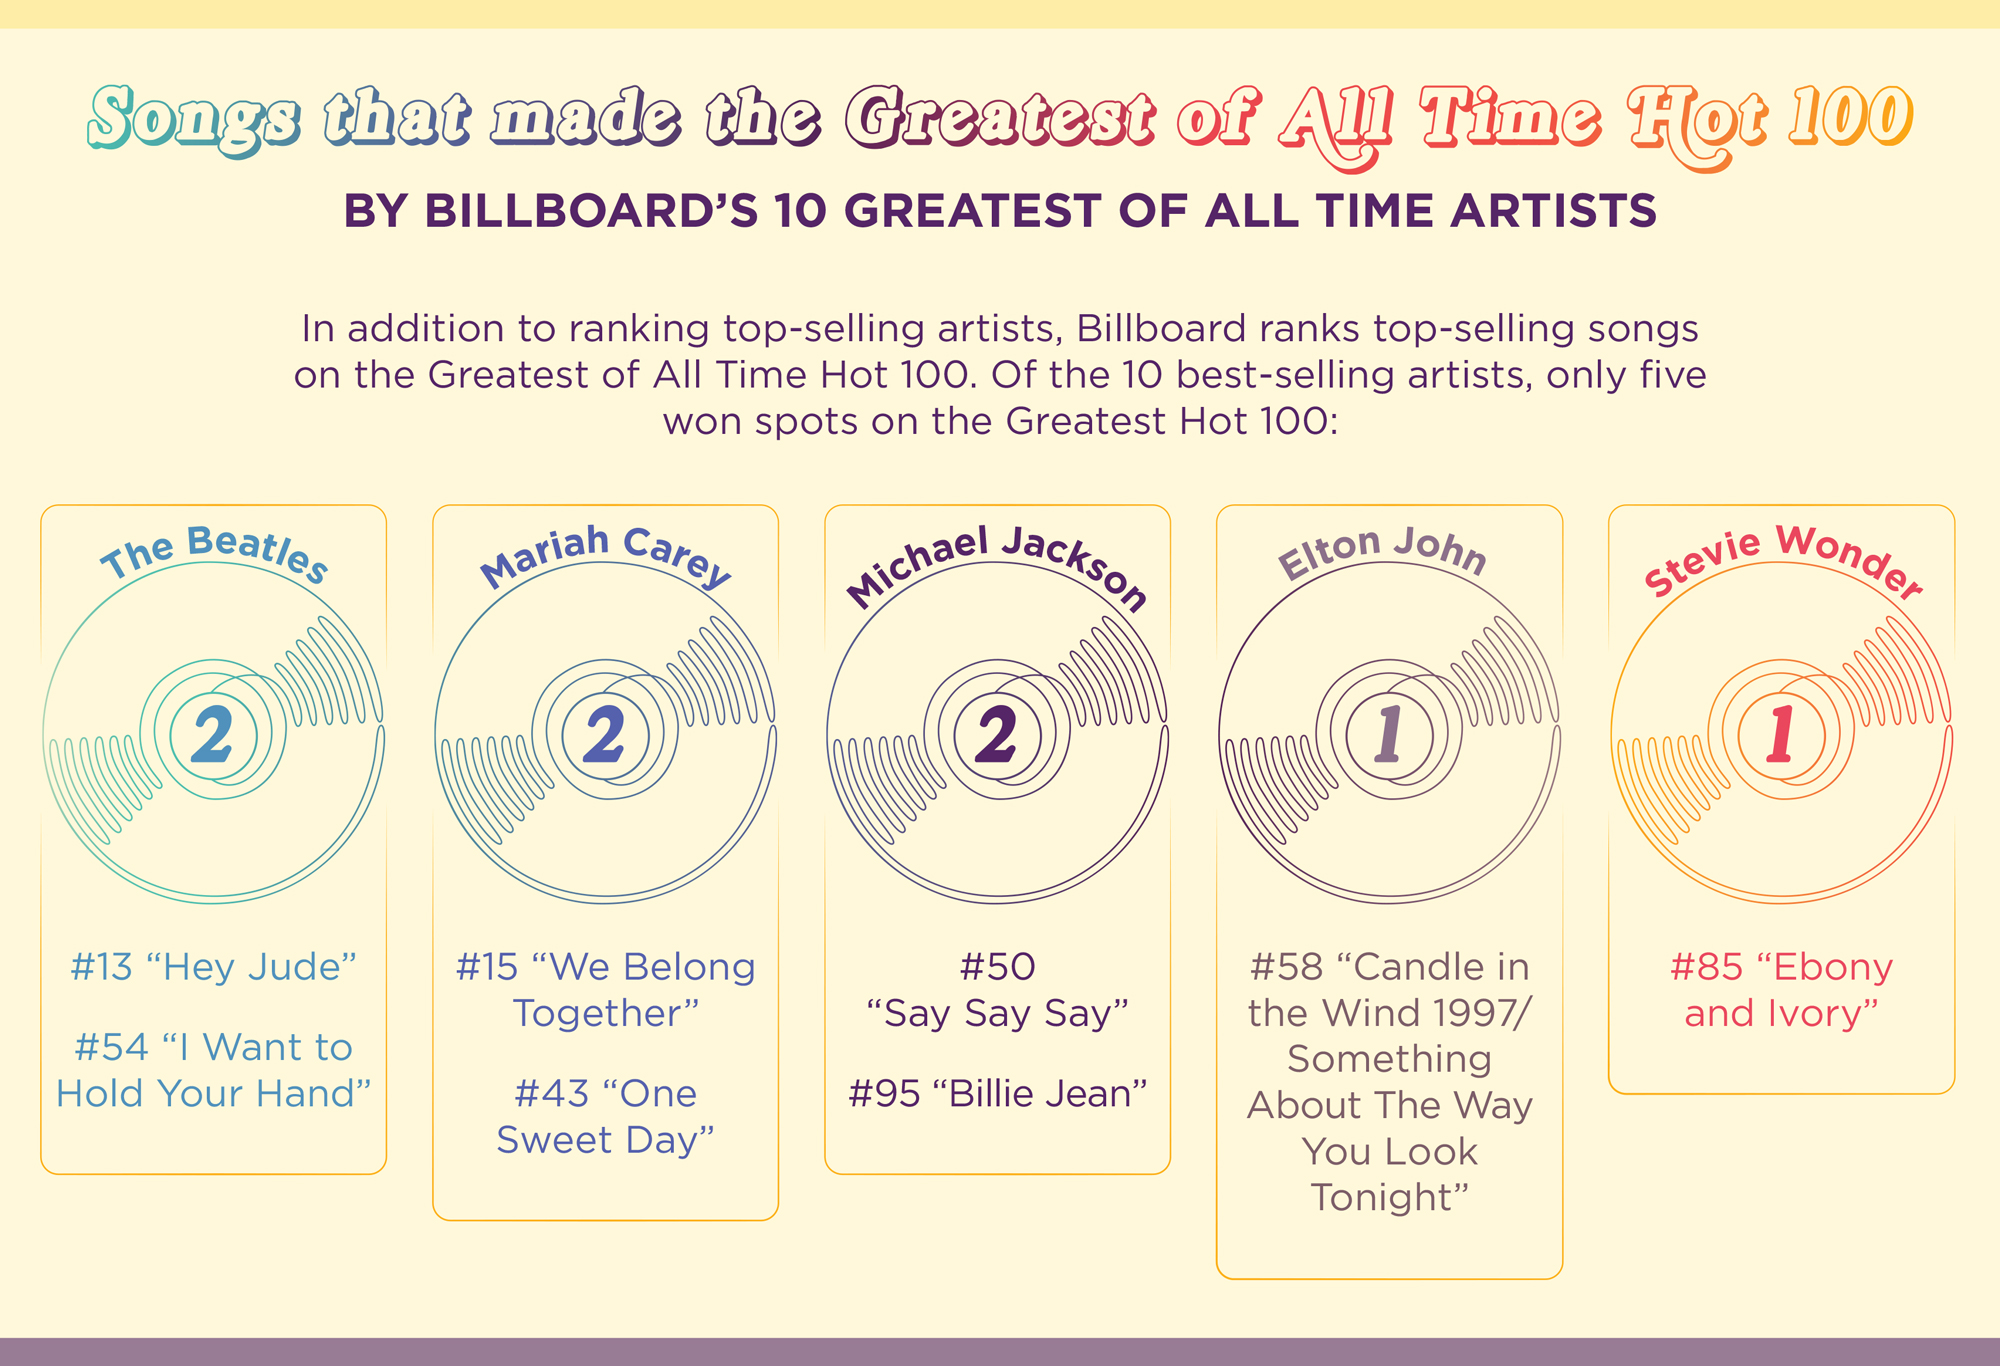 Songs that made the Greatest of All Time Hot 100 by Billboard's 10 greatest of all time artists